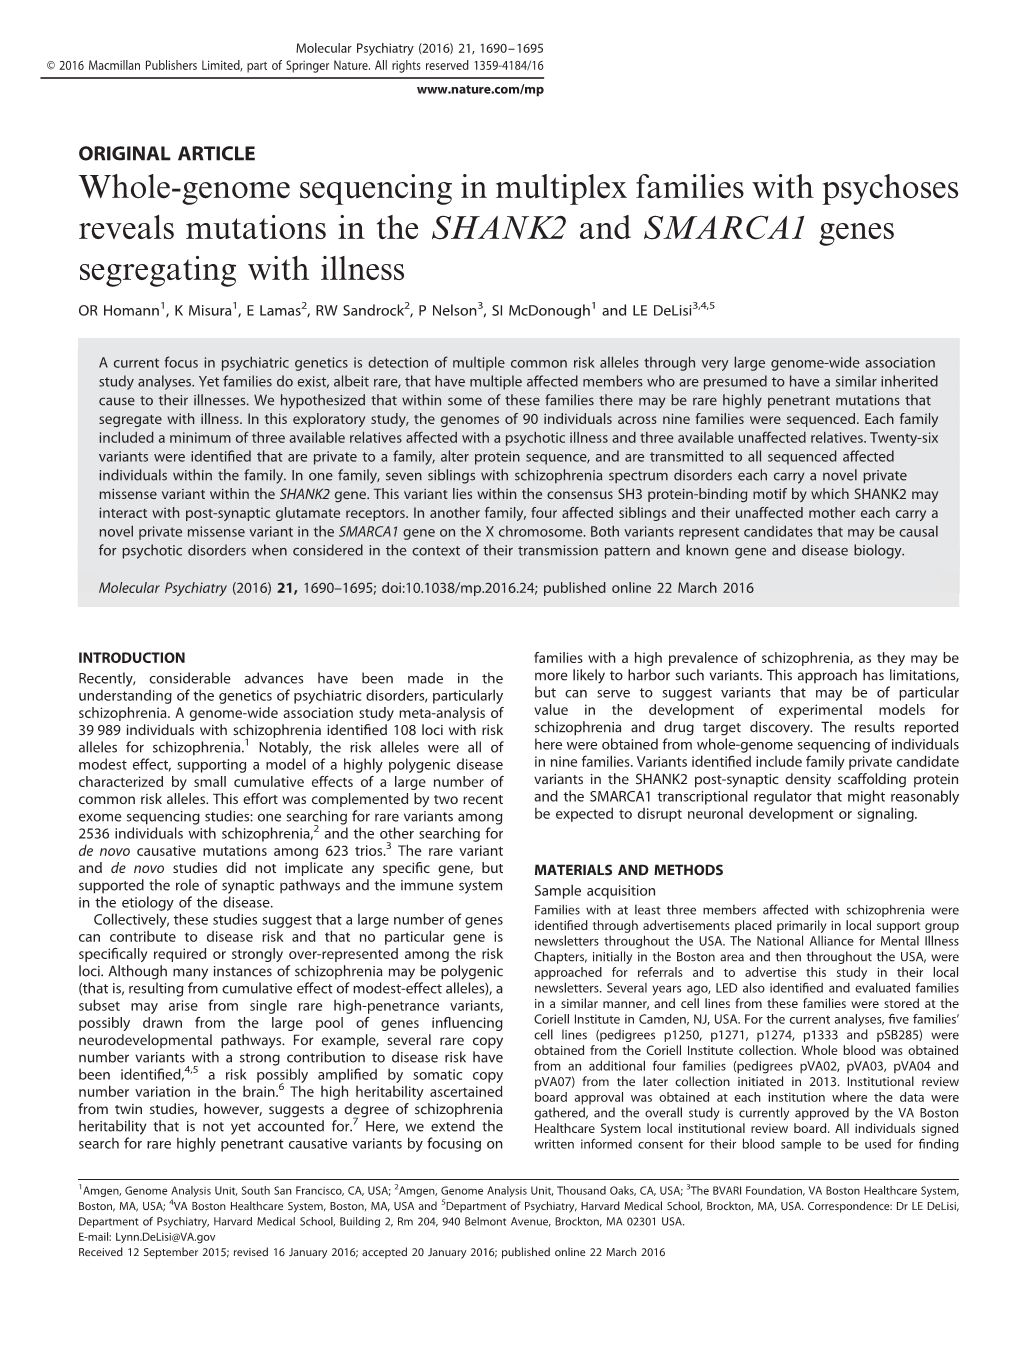 Whole-Genome Sequencing in Multiplex Families with Psychoses Reveals Mutations in the SHANK2 and SMARCA1 Genes Segregating with Illness